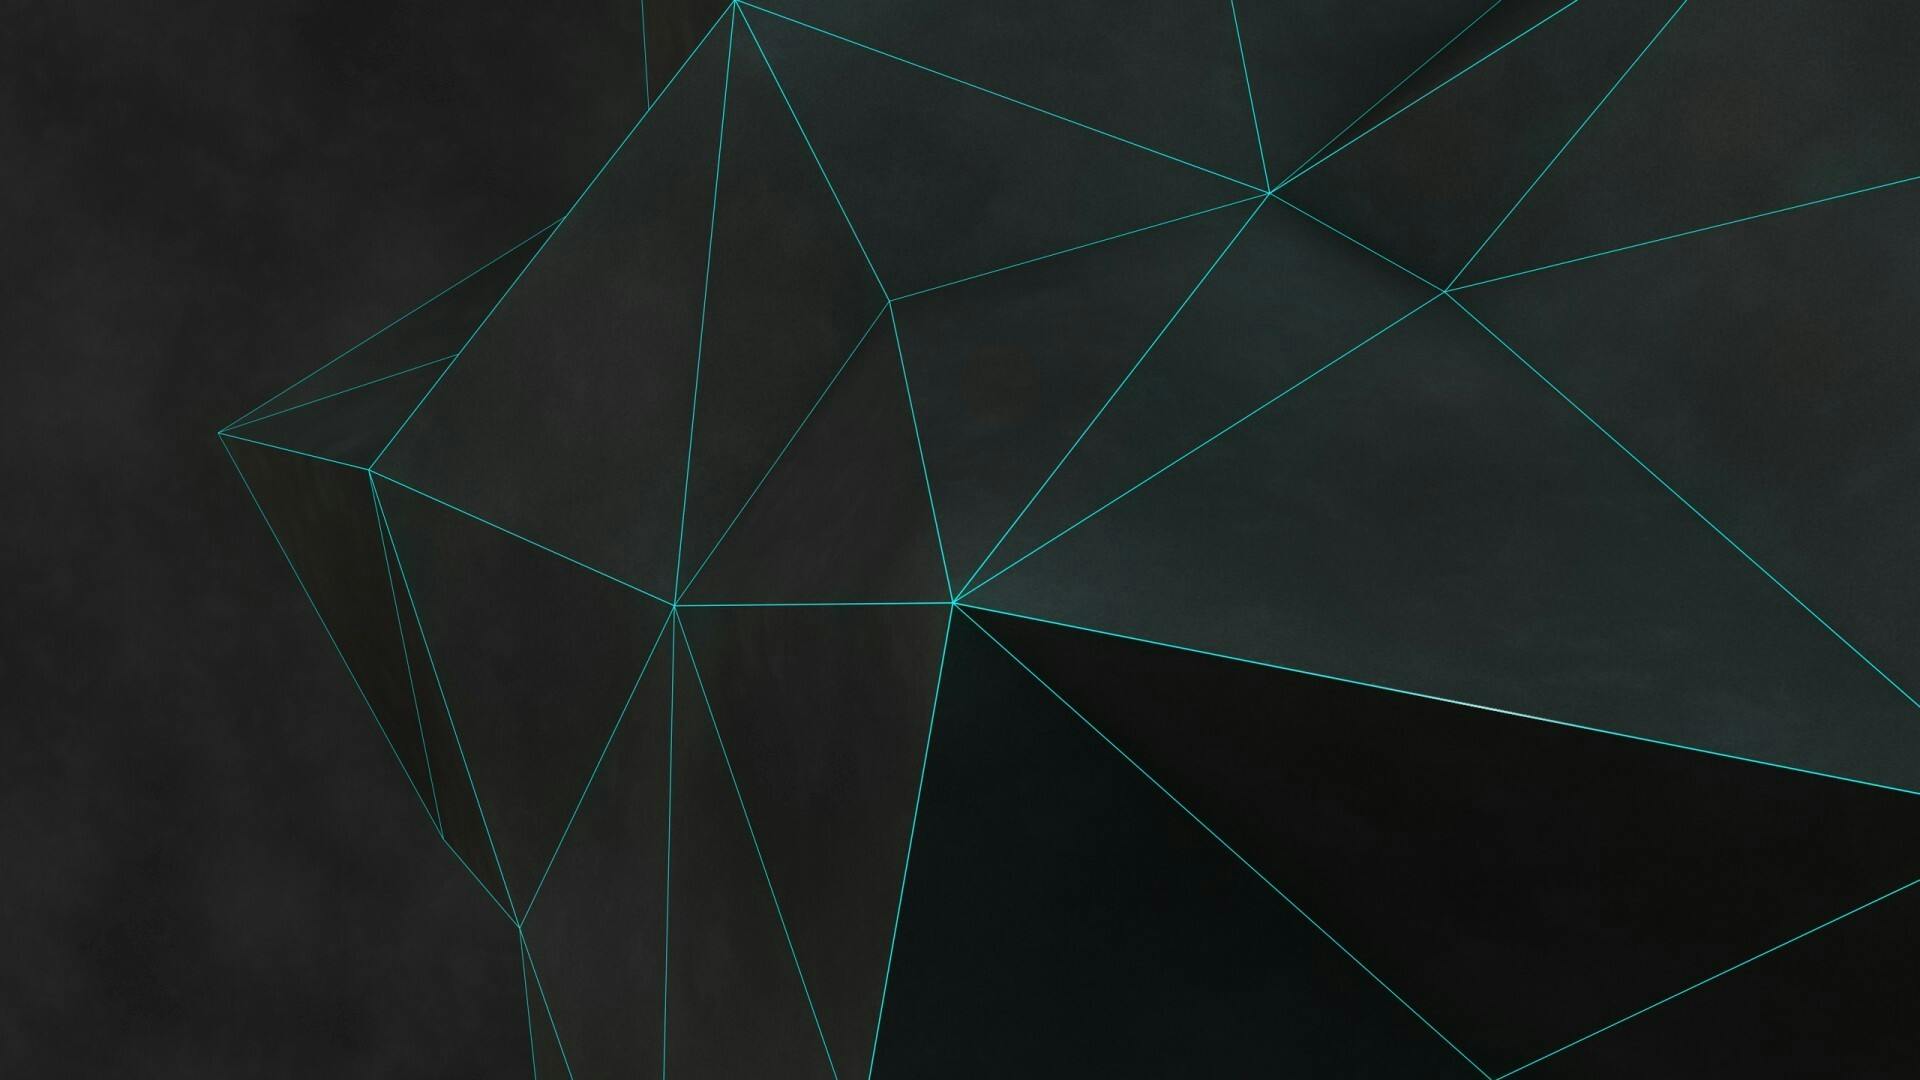 Background abstract image with triangles